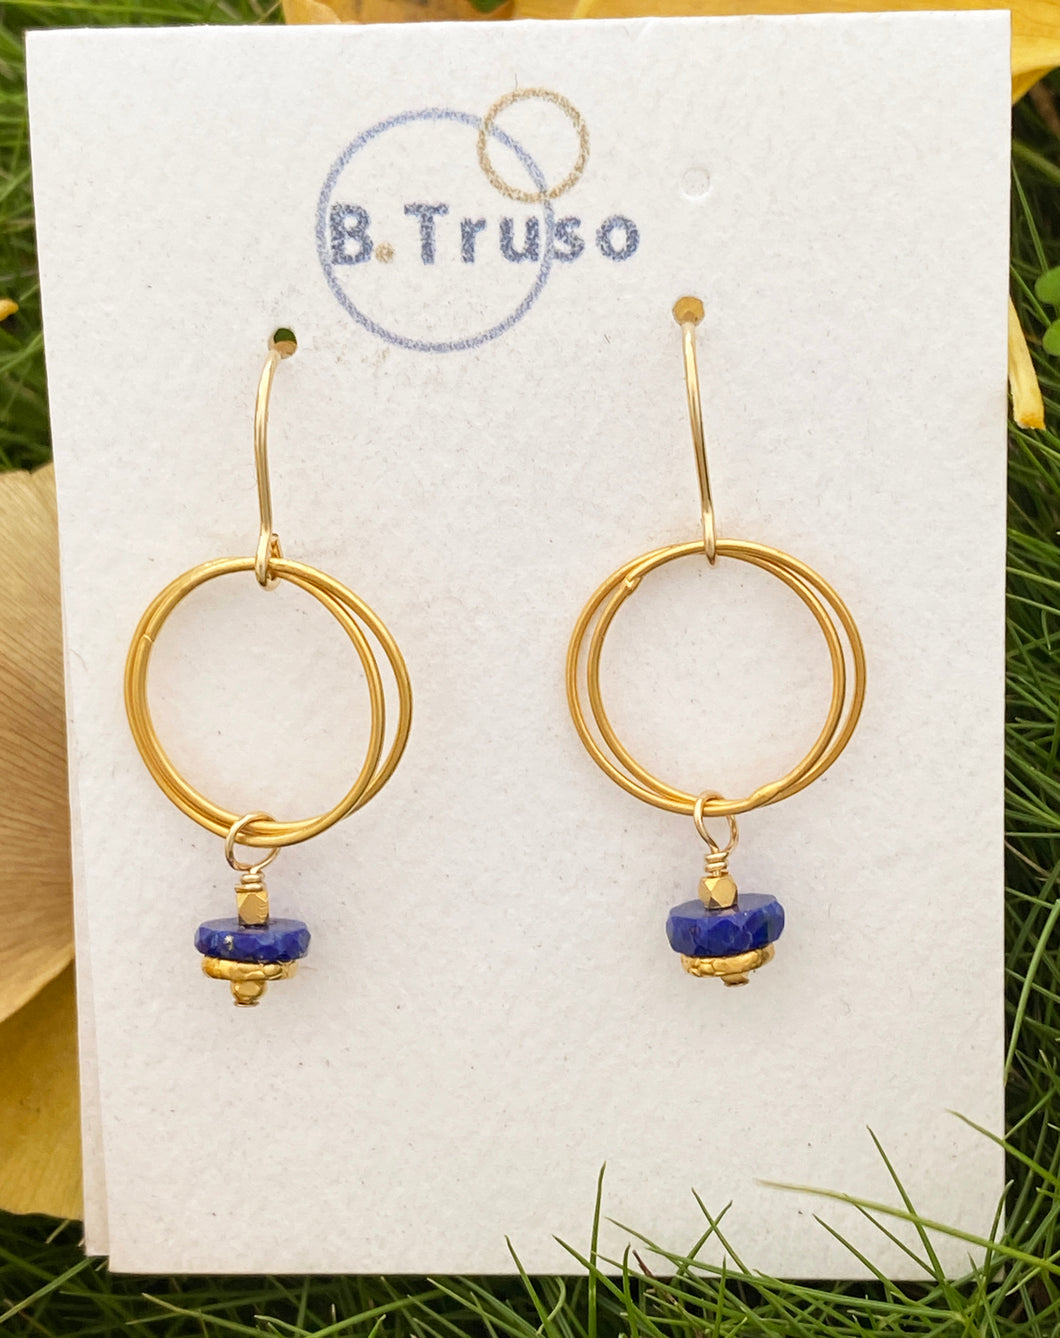 Lutza Earrings with 24kt Gold Plate Circles and faceted Lapis Beads